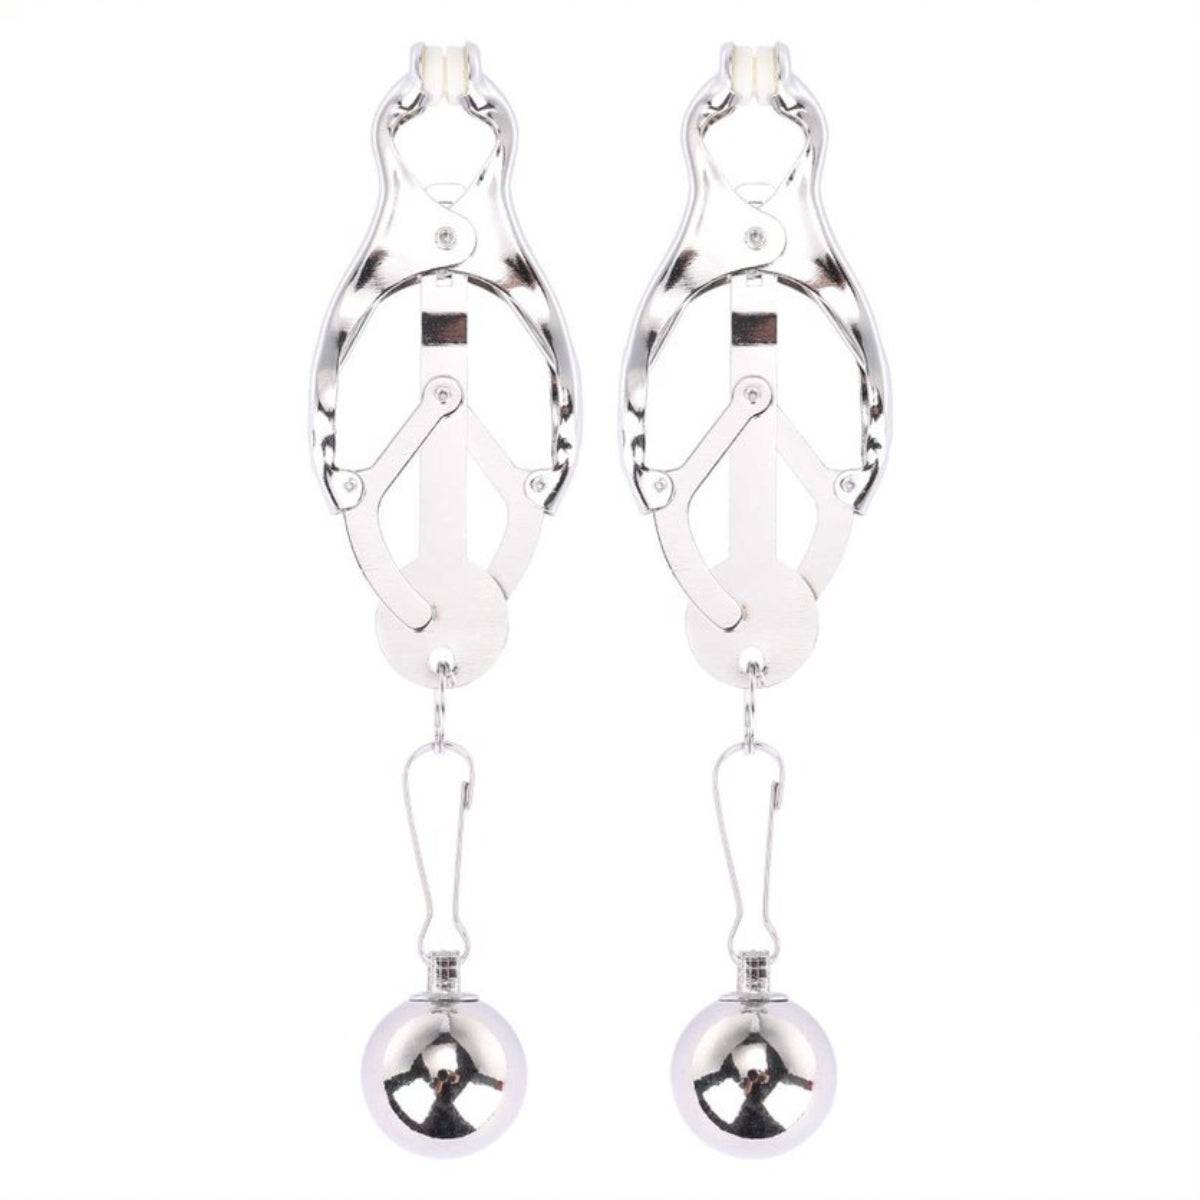 Me You Us Clover Nipple Clamps Silver - Simply Pleasure